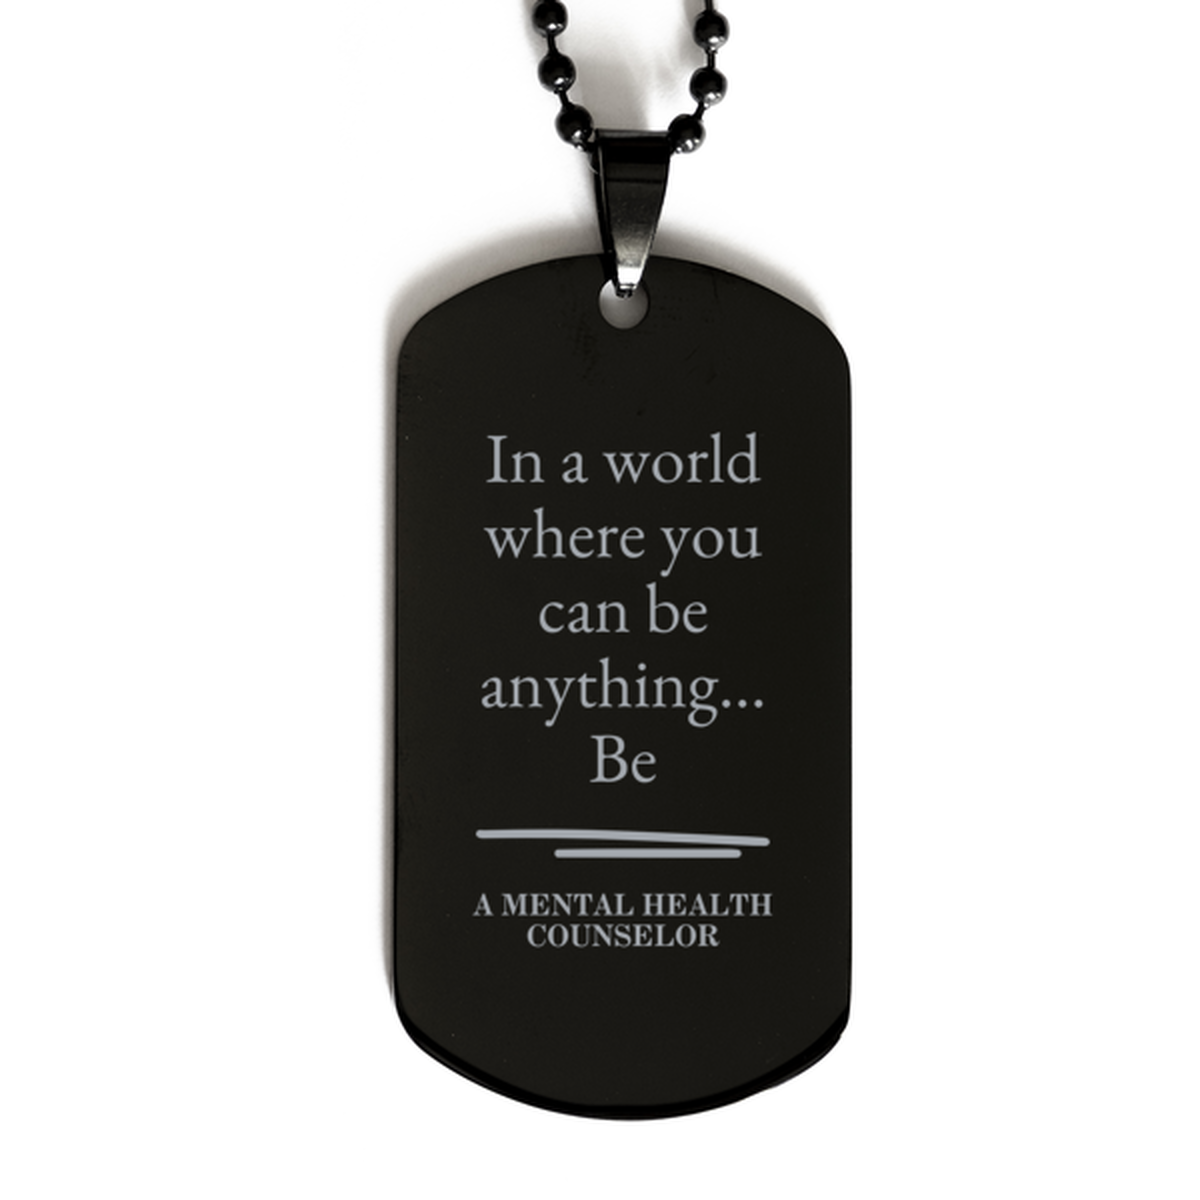 Gifts for Mental Health Counselor, In a world where you can be anything, Appreciation Birthday Black Dog Tag for Men, Women, Friends, Coworkers